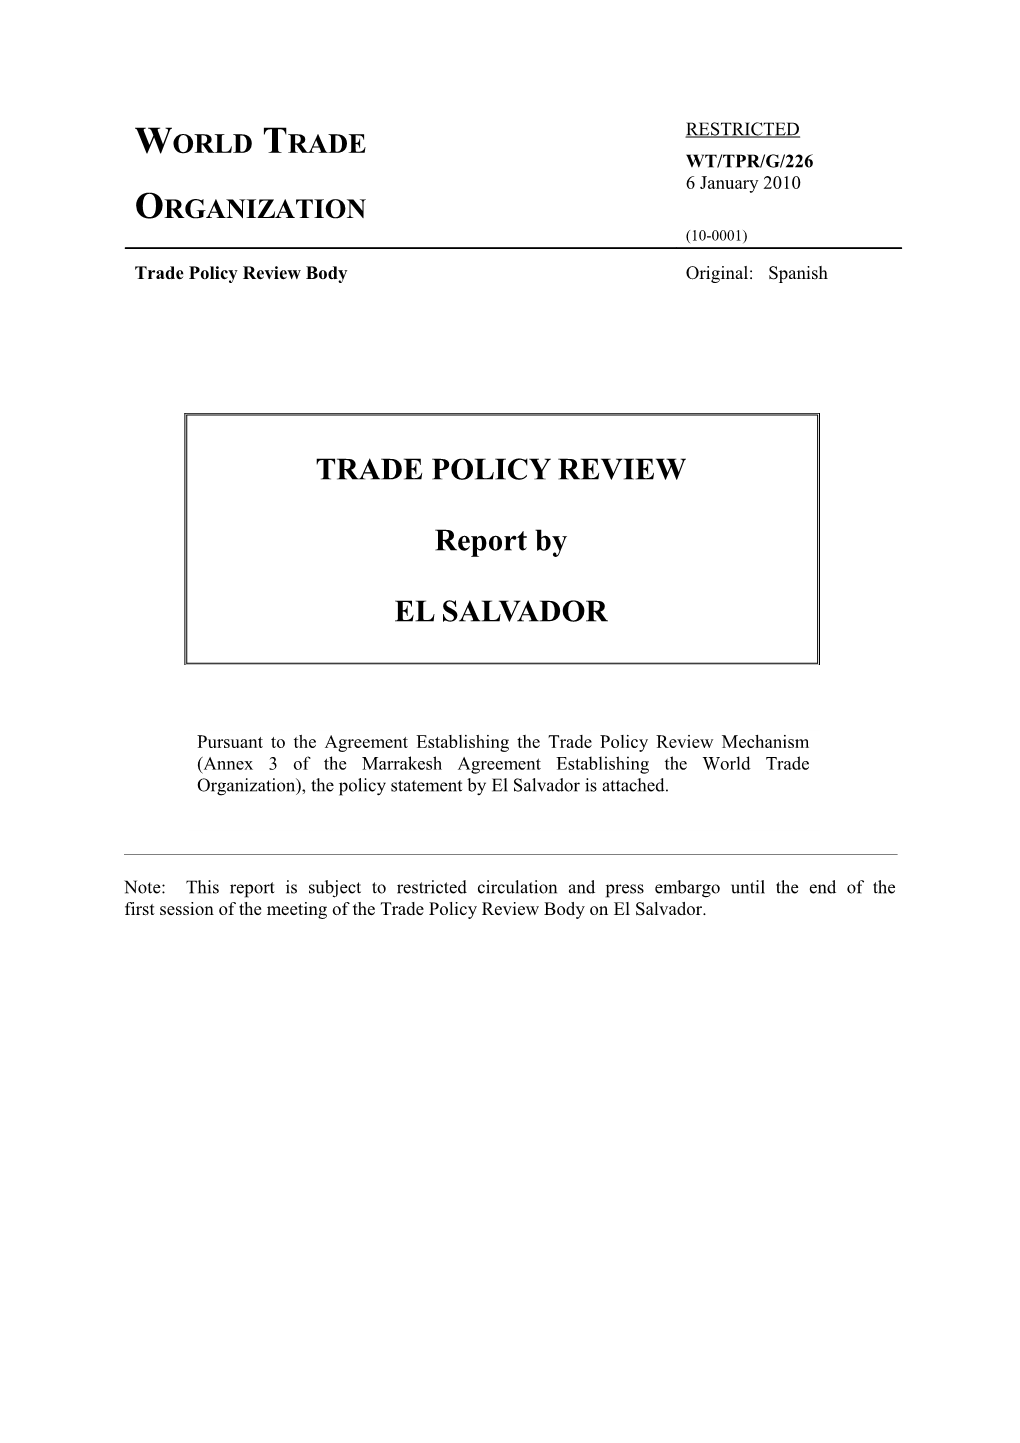 Ii.Economic and Trade Policy Environment